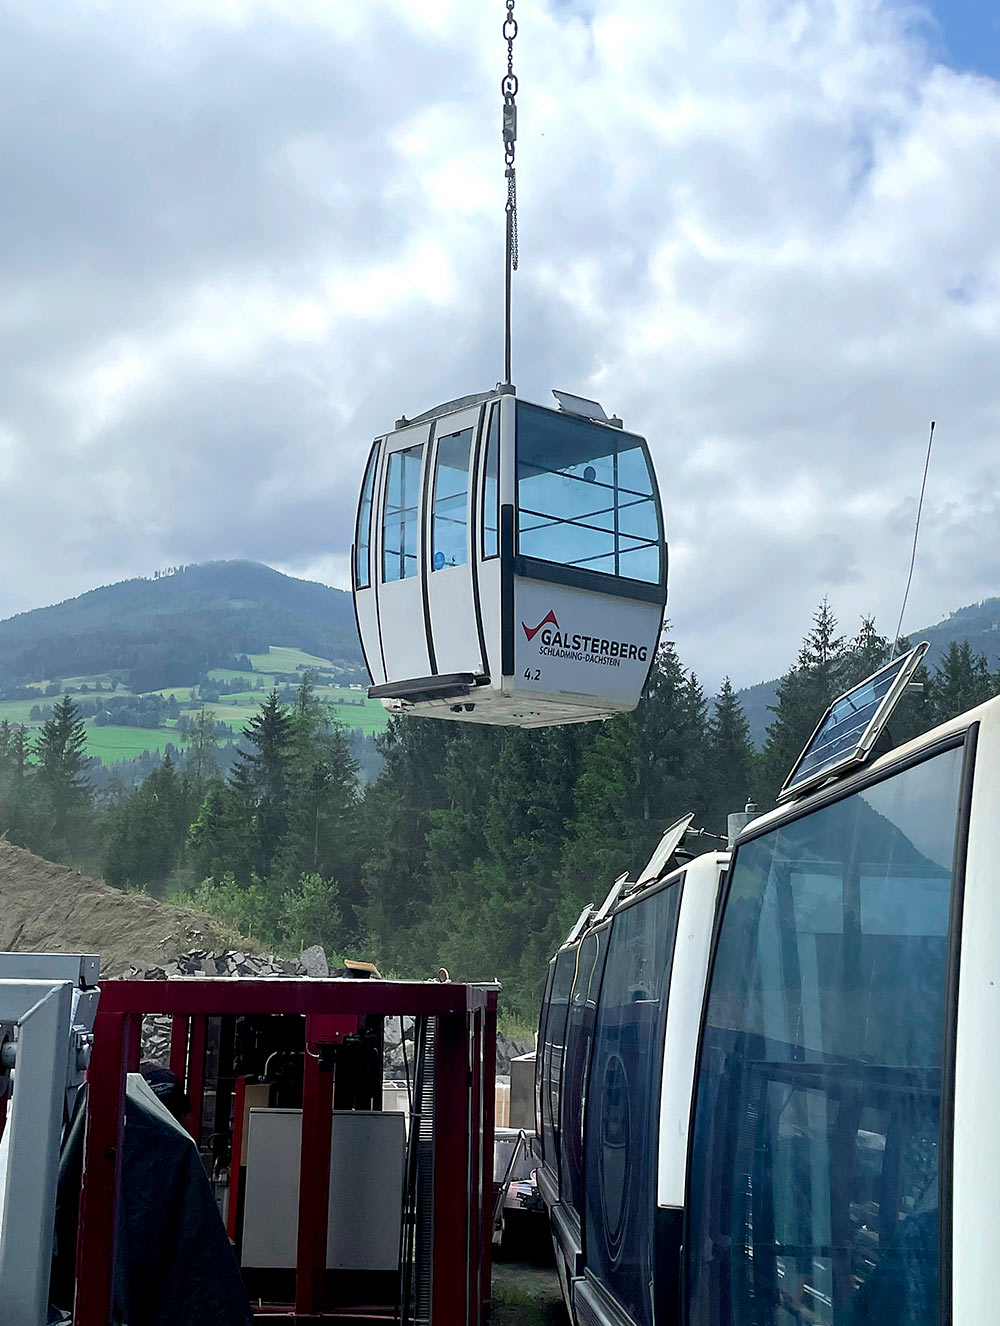 Gondola cabin being airlifted by helicopter